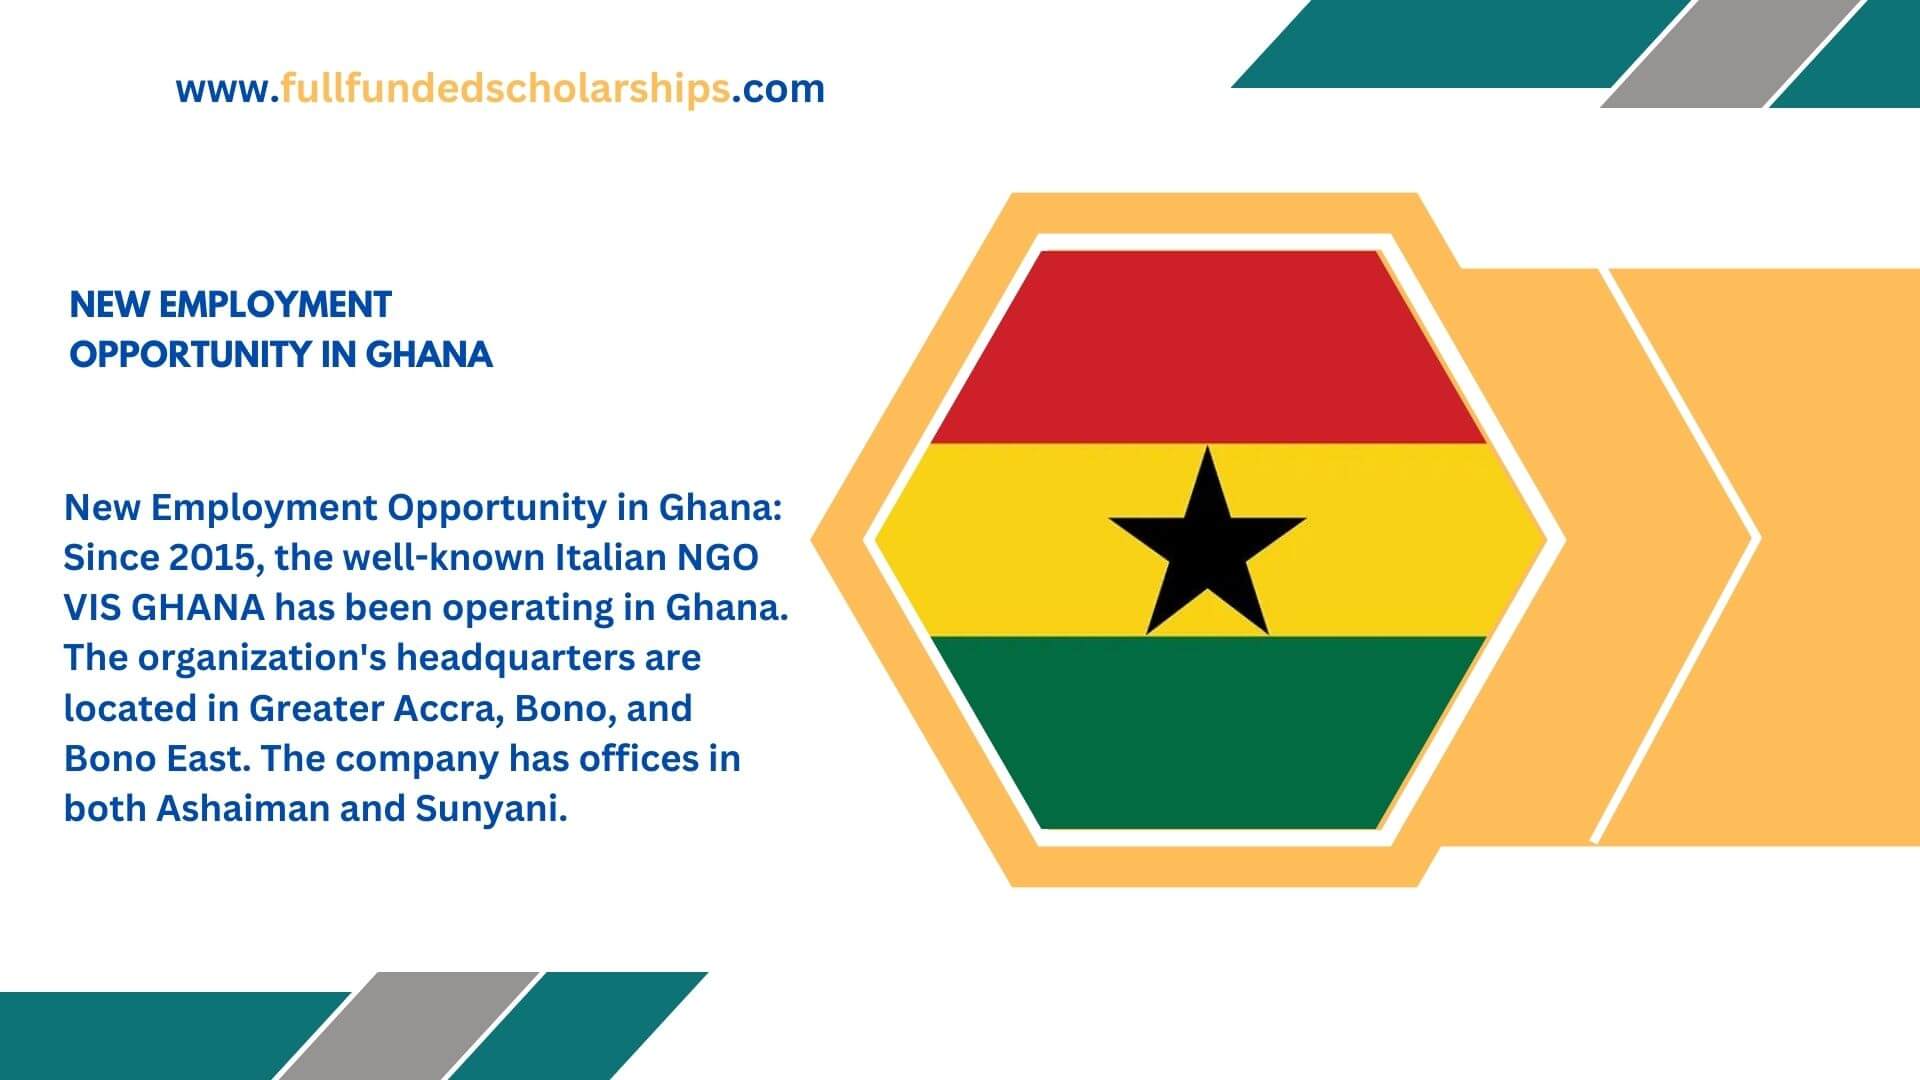 New Employment Opportunity in Ghana